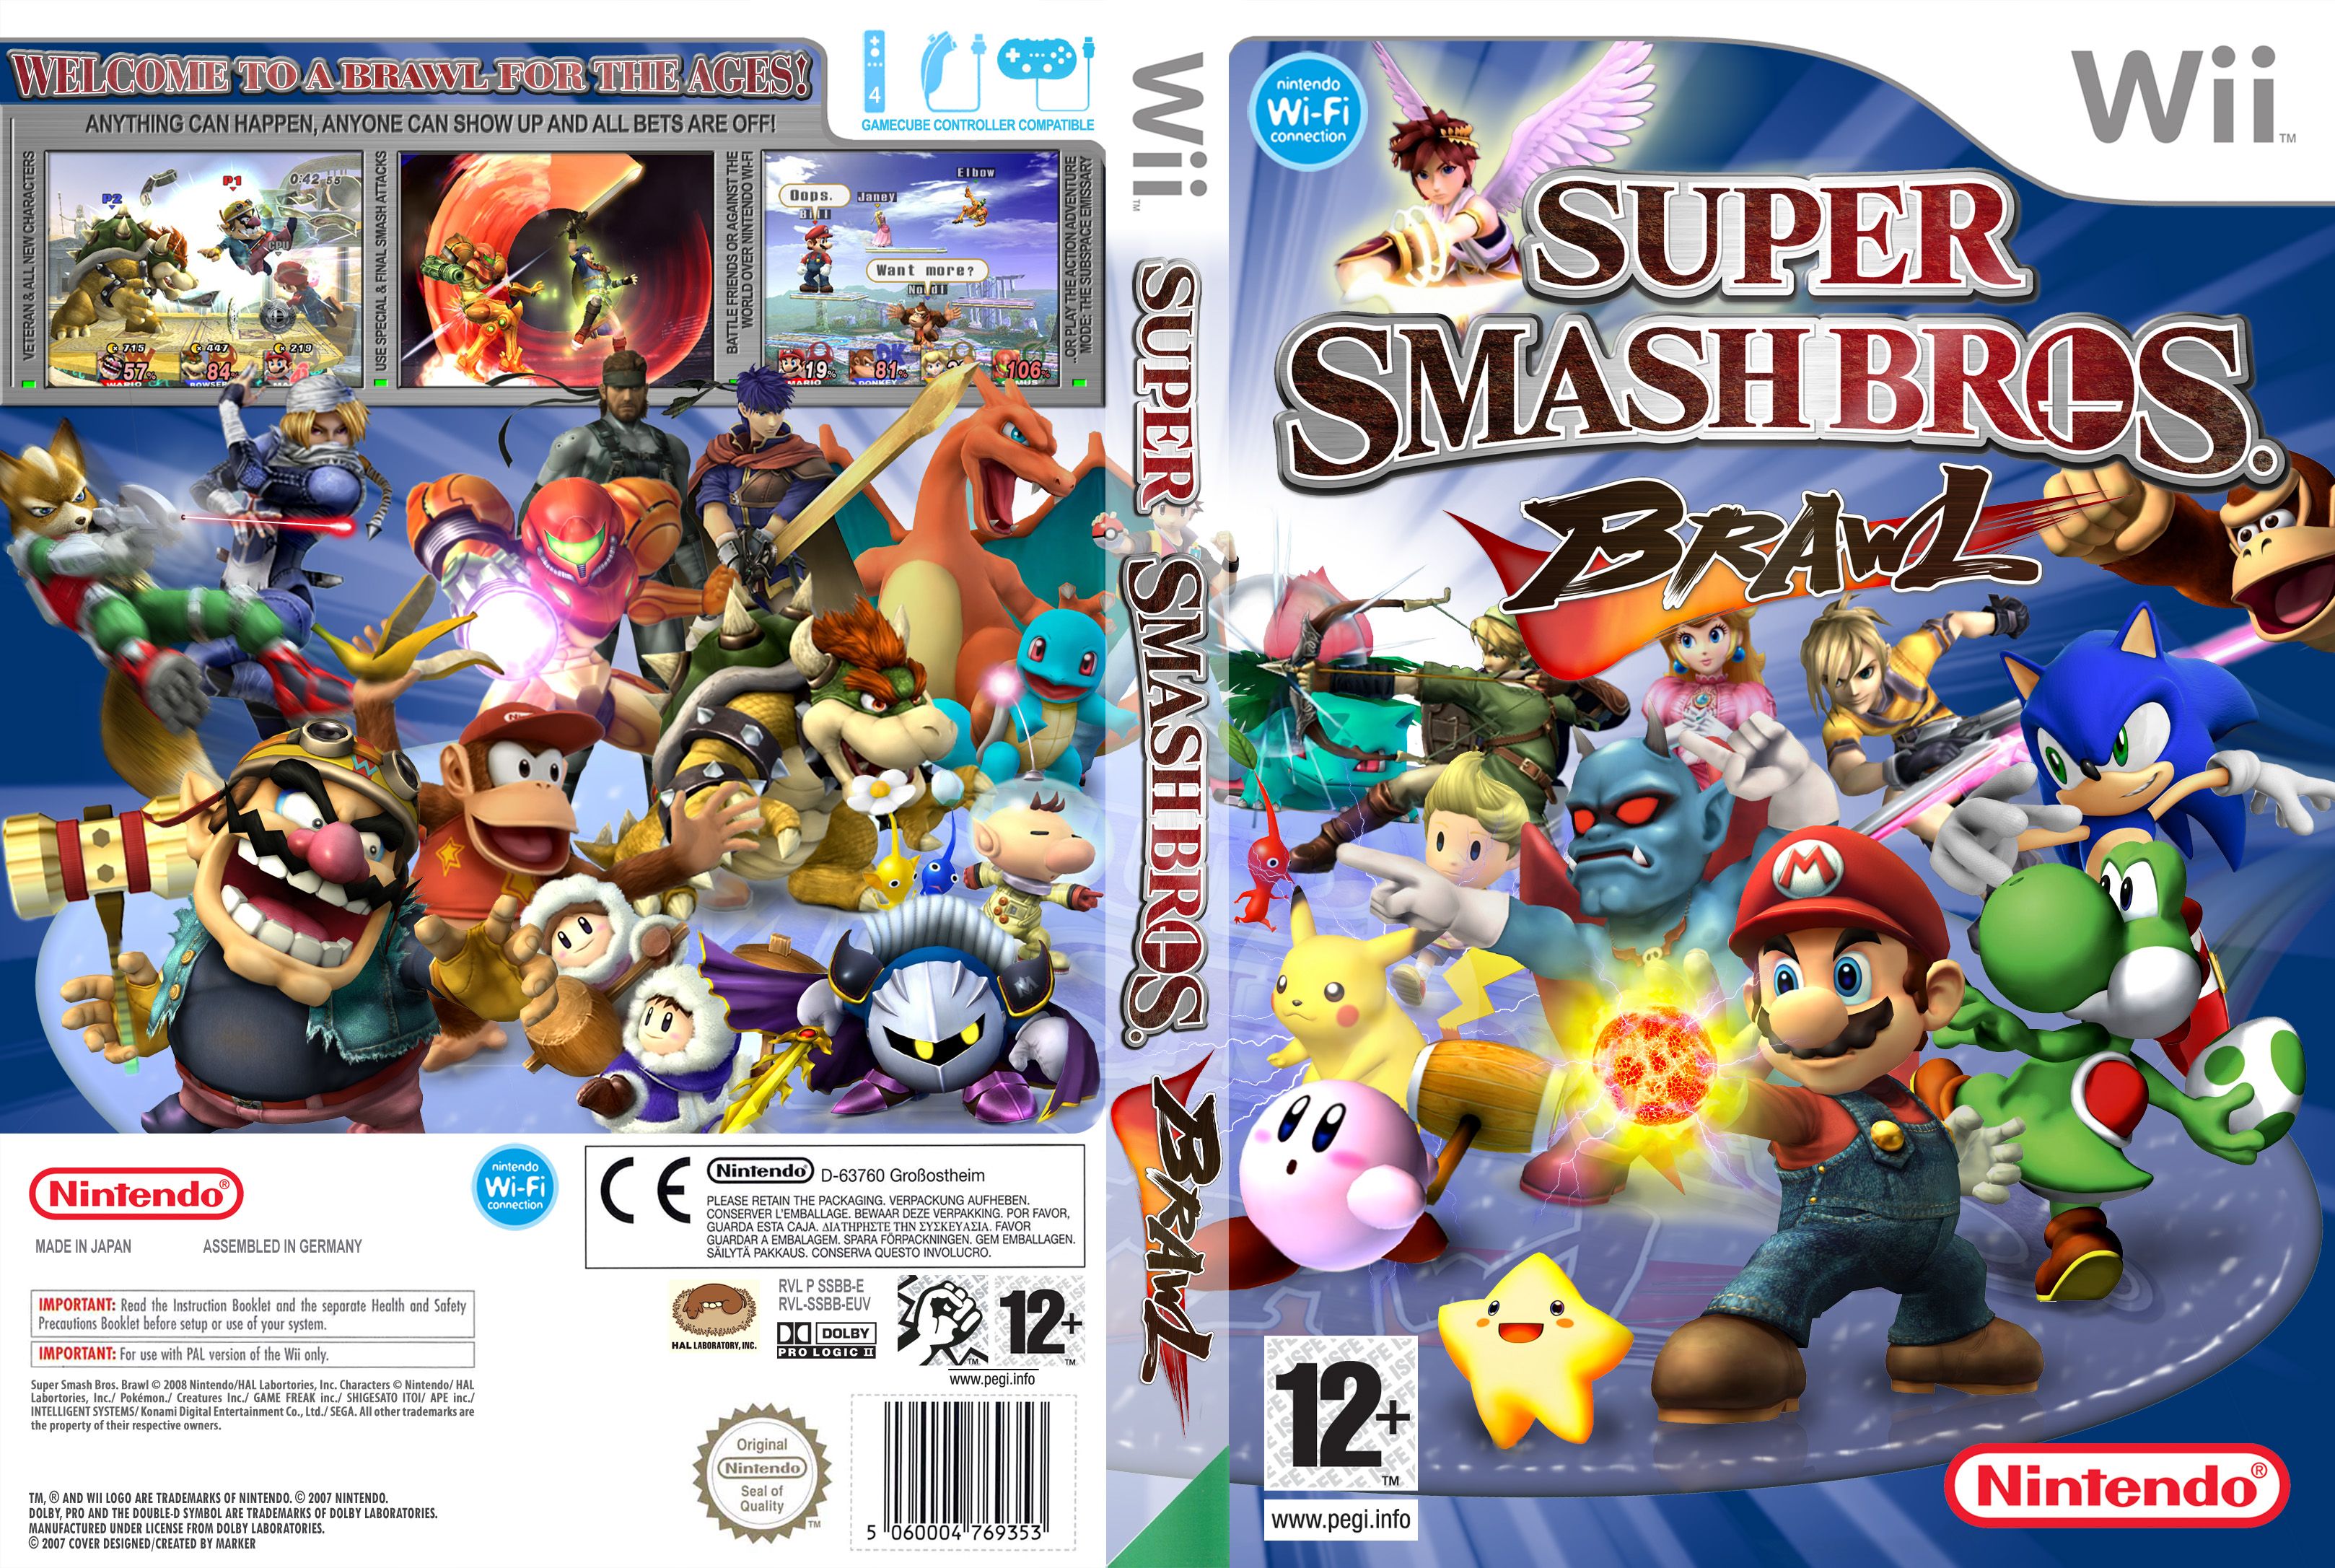 Super Smash Bros Brawl PAL Wii FULL1 Wii Covers Cover Century. 